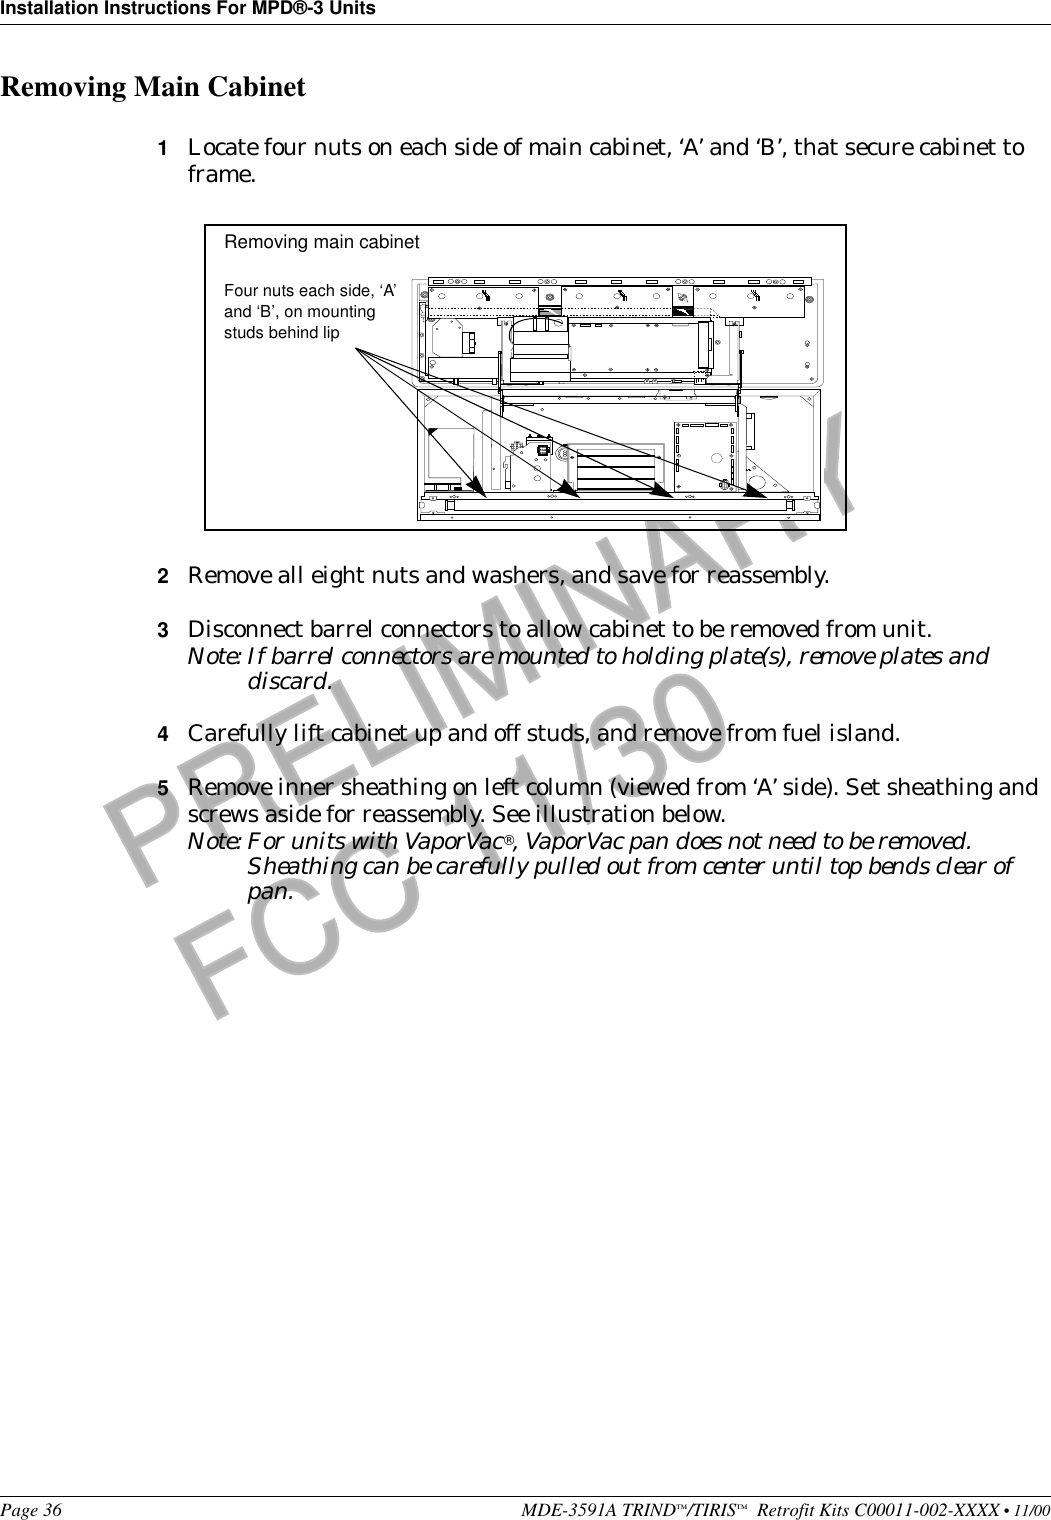 Installation Instructions For MPD®-3 UnitsPage 36 MDE-3591A TRIND™/TIRIS™  Retrofit Kits C00011-002-XXXX • 11/00PRELIMINARYFCC 11/30Removing Main Cabinet1Locate four nuts on each side of main cabinet, ‘A’ and ‘B’, that secure cabinet to frame. 2Remove all eight nuts and washers, and save for reassembly.3Disconnect barrel connectors to allow cabinet to be removed from unit.Note: If barrel connectors are mounted to holding plate(s), remove plates and discard.4Carefully lift cabinet up and off studs, and remove from fuel island.5Remove inner sheathing on left column (viewed from ‘A’ side). Set sheathing and screws aside for reassembly. See illustration below.Note: For units with VaporVac®, VaporVac pan does not need to be removed. Sheathing can be carefully pulled out from center until top bends clear of pan.+++++++++++++++++++++++++++++++++++++Four nuts each side, ‘A’ and ‘B’, on mounting studs behind lipRemoving main cabinet